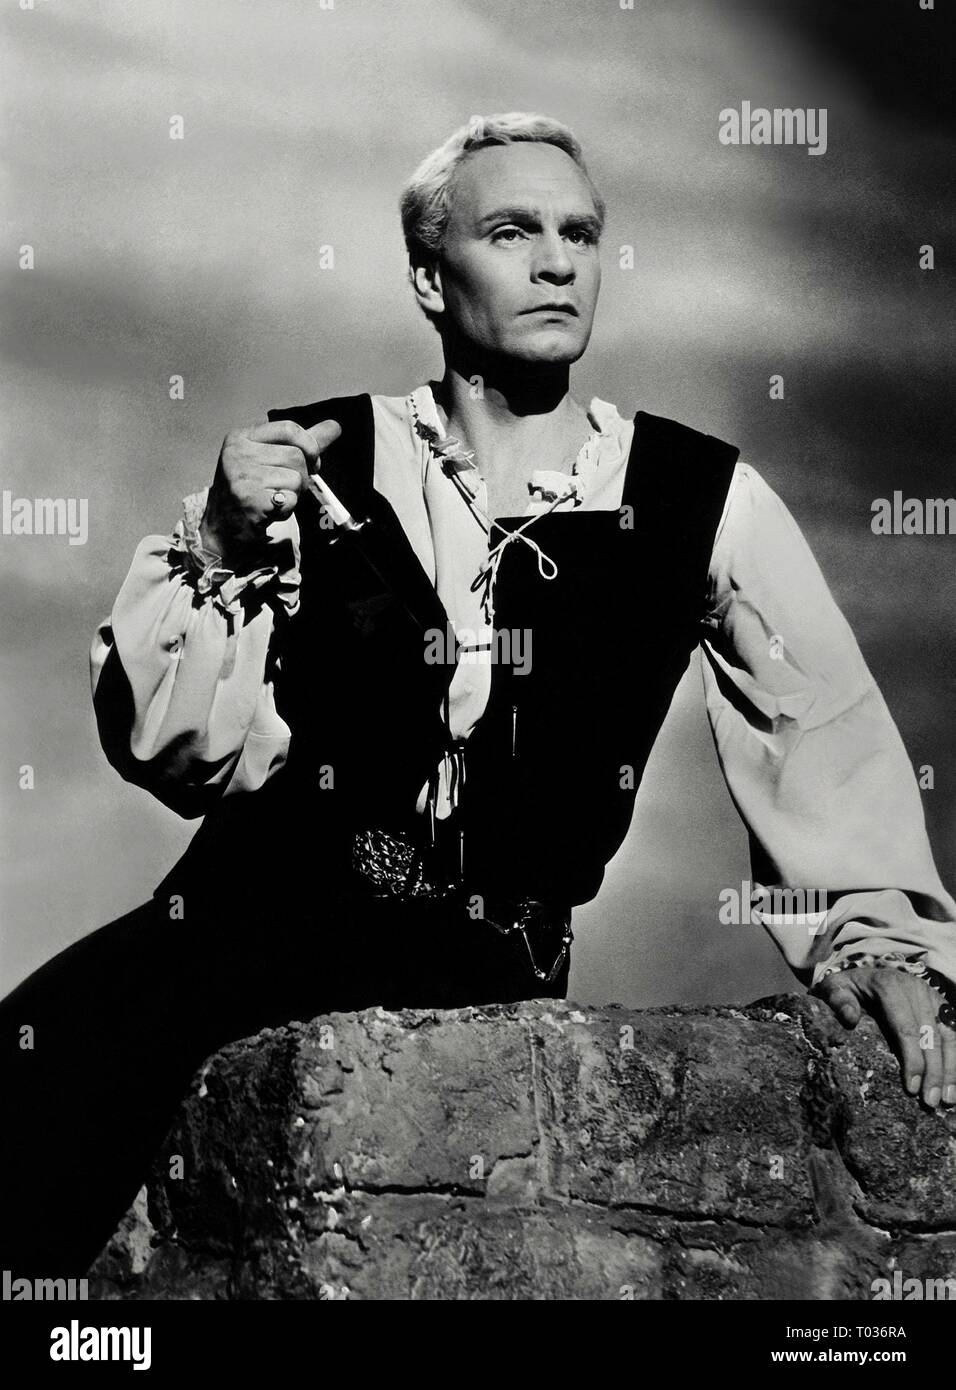 LAURENCE OLIVIER, frazione, 1948 Foto Stock